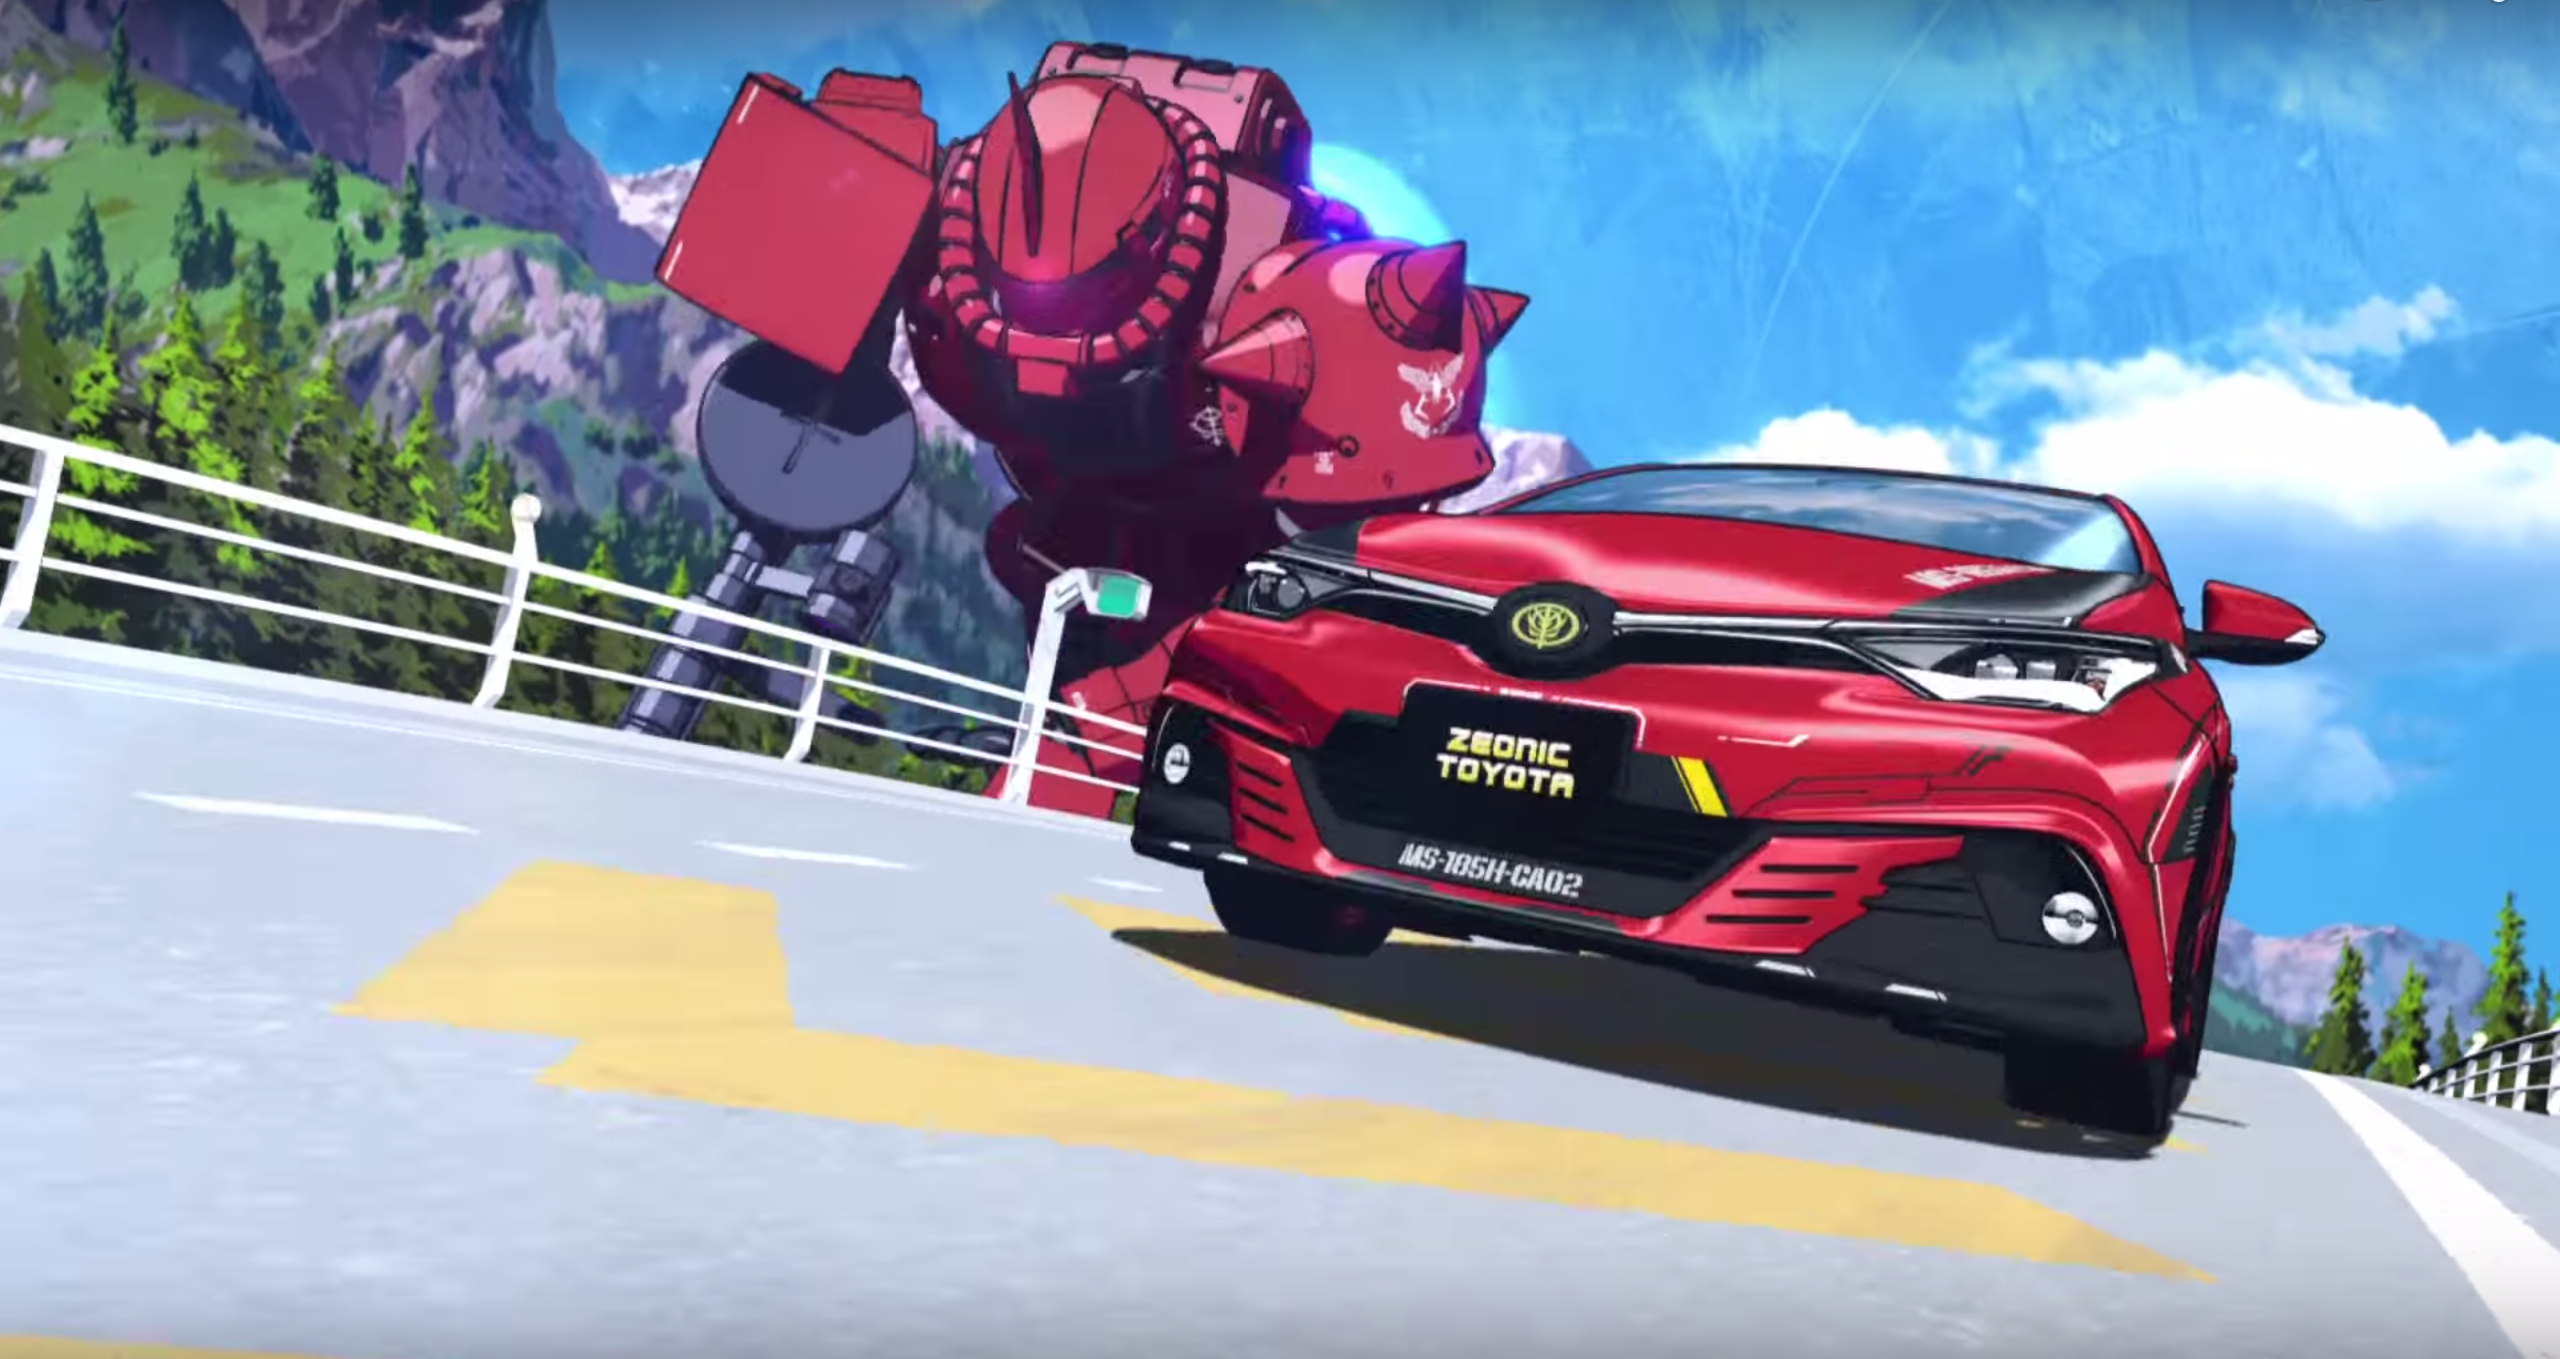 Auris gets 'Zeonic Toyota' limited edition in Japan as part of Mobile Suit Gundam collaboration advert